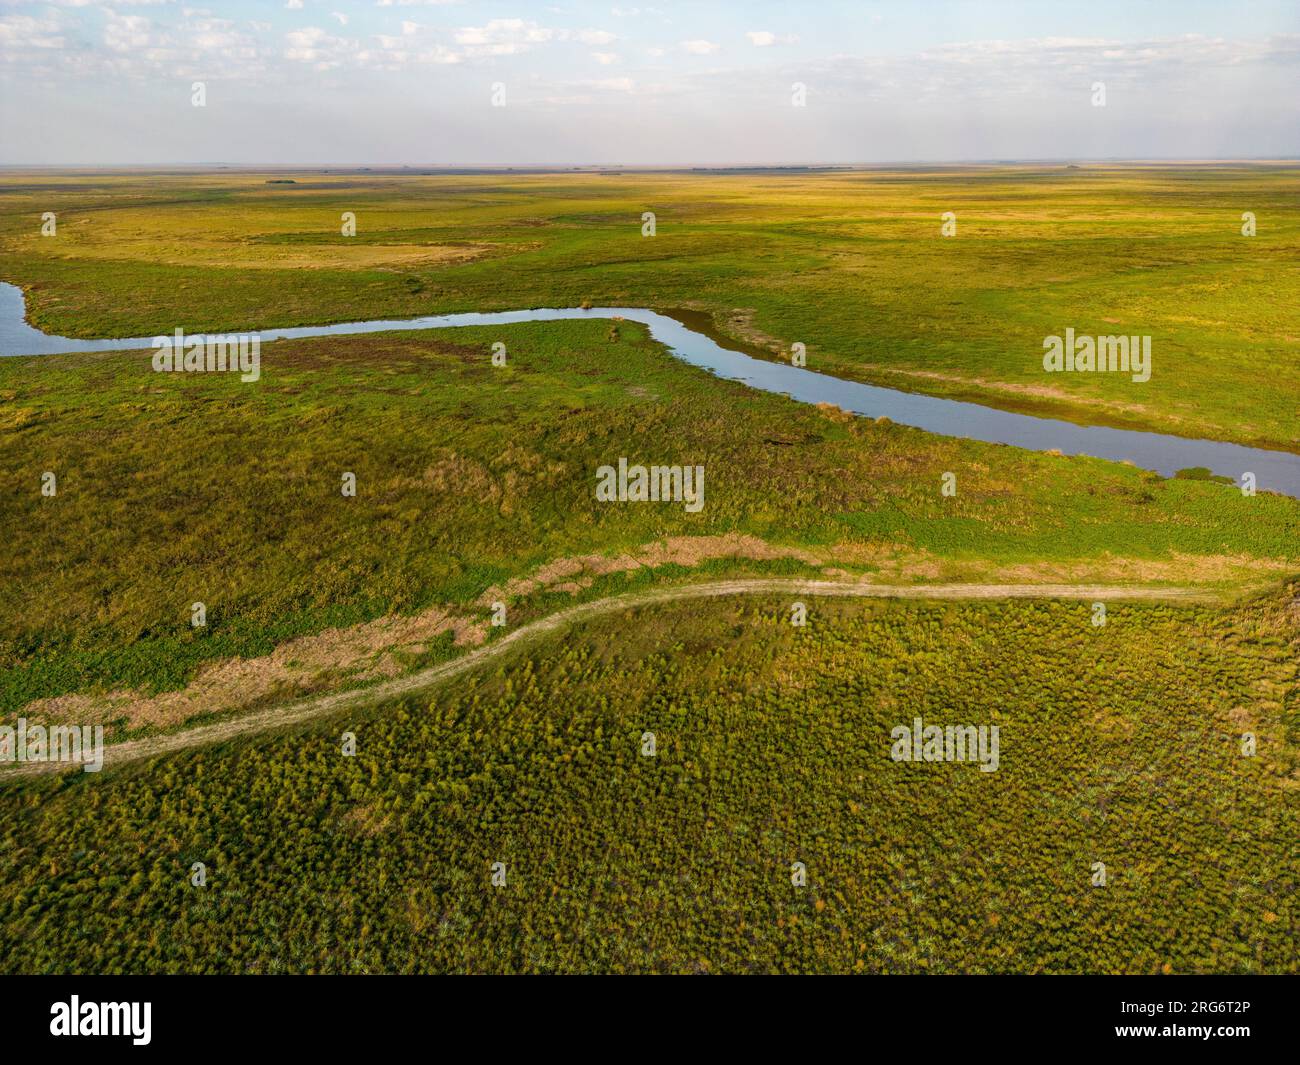 Aerial view of the Esteros del Ibera, a huge swampland and paradise for nature lovers & bird watchers in Argentina, South America Stock Photo